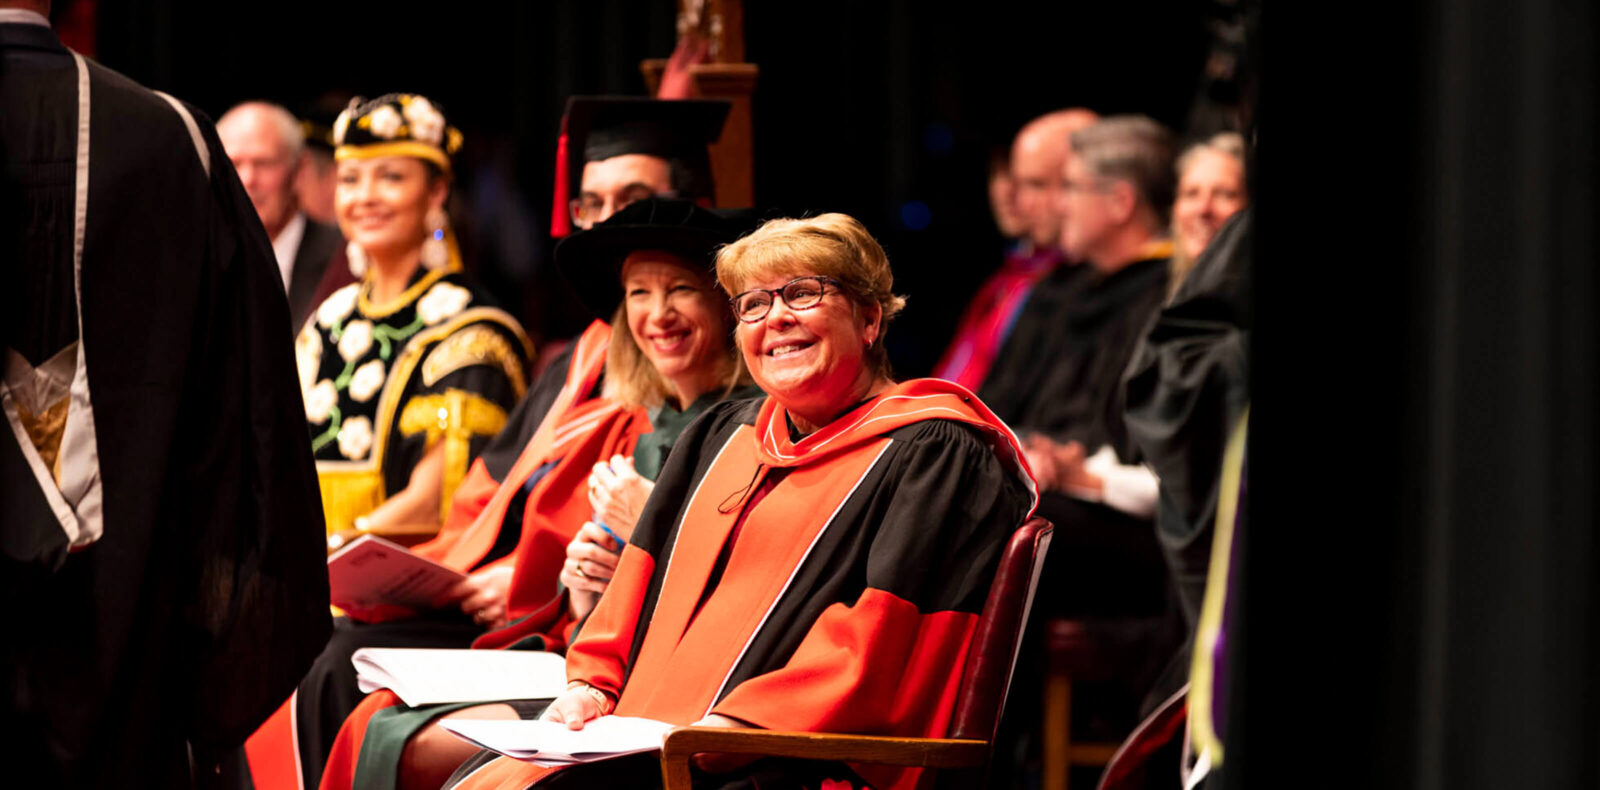 Dean Heather Sheardown smiles at a student on stage at convocation.